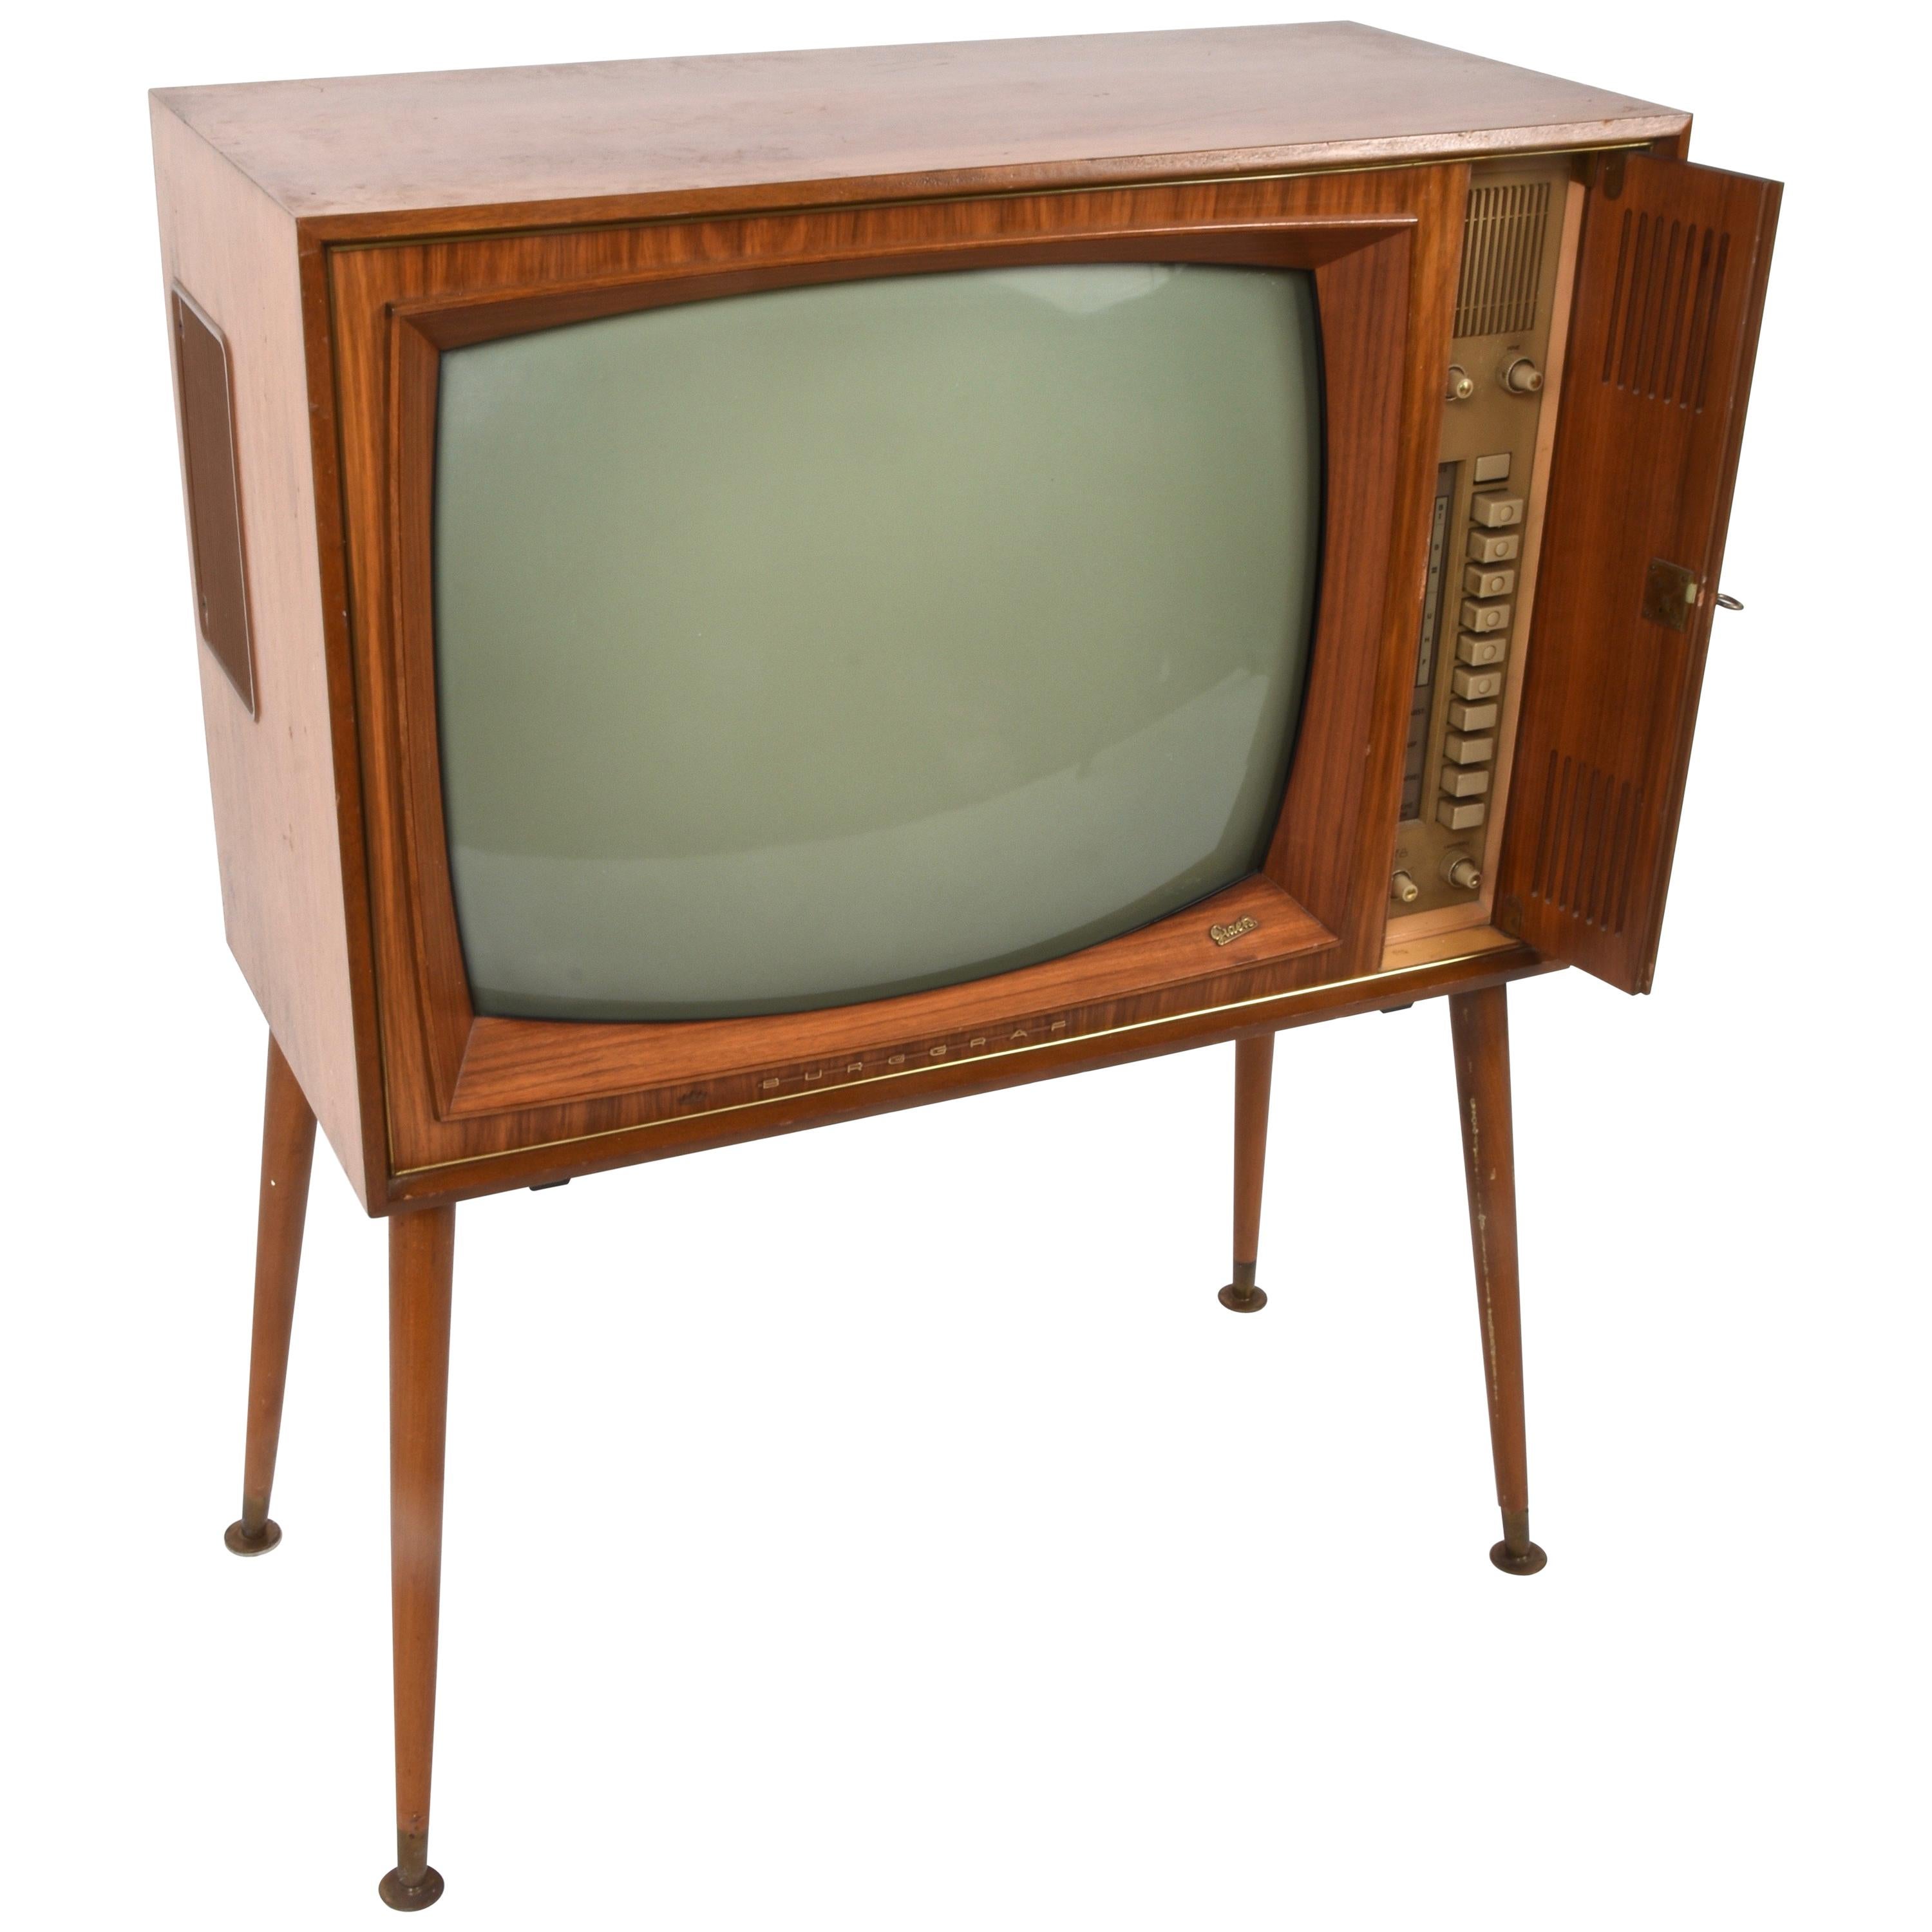 Amazing midcentury wooden floor German furniture TV set. This wonderful piece was produced in Germany during the 1960s.

Unfortunately, we do not know if the television is functioning as it has not been rewired, however, the classic and popular